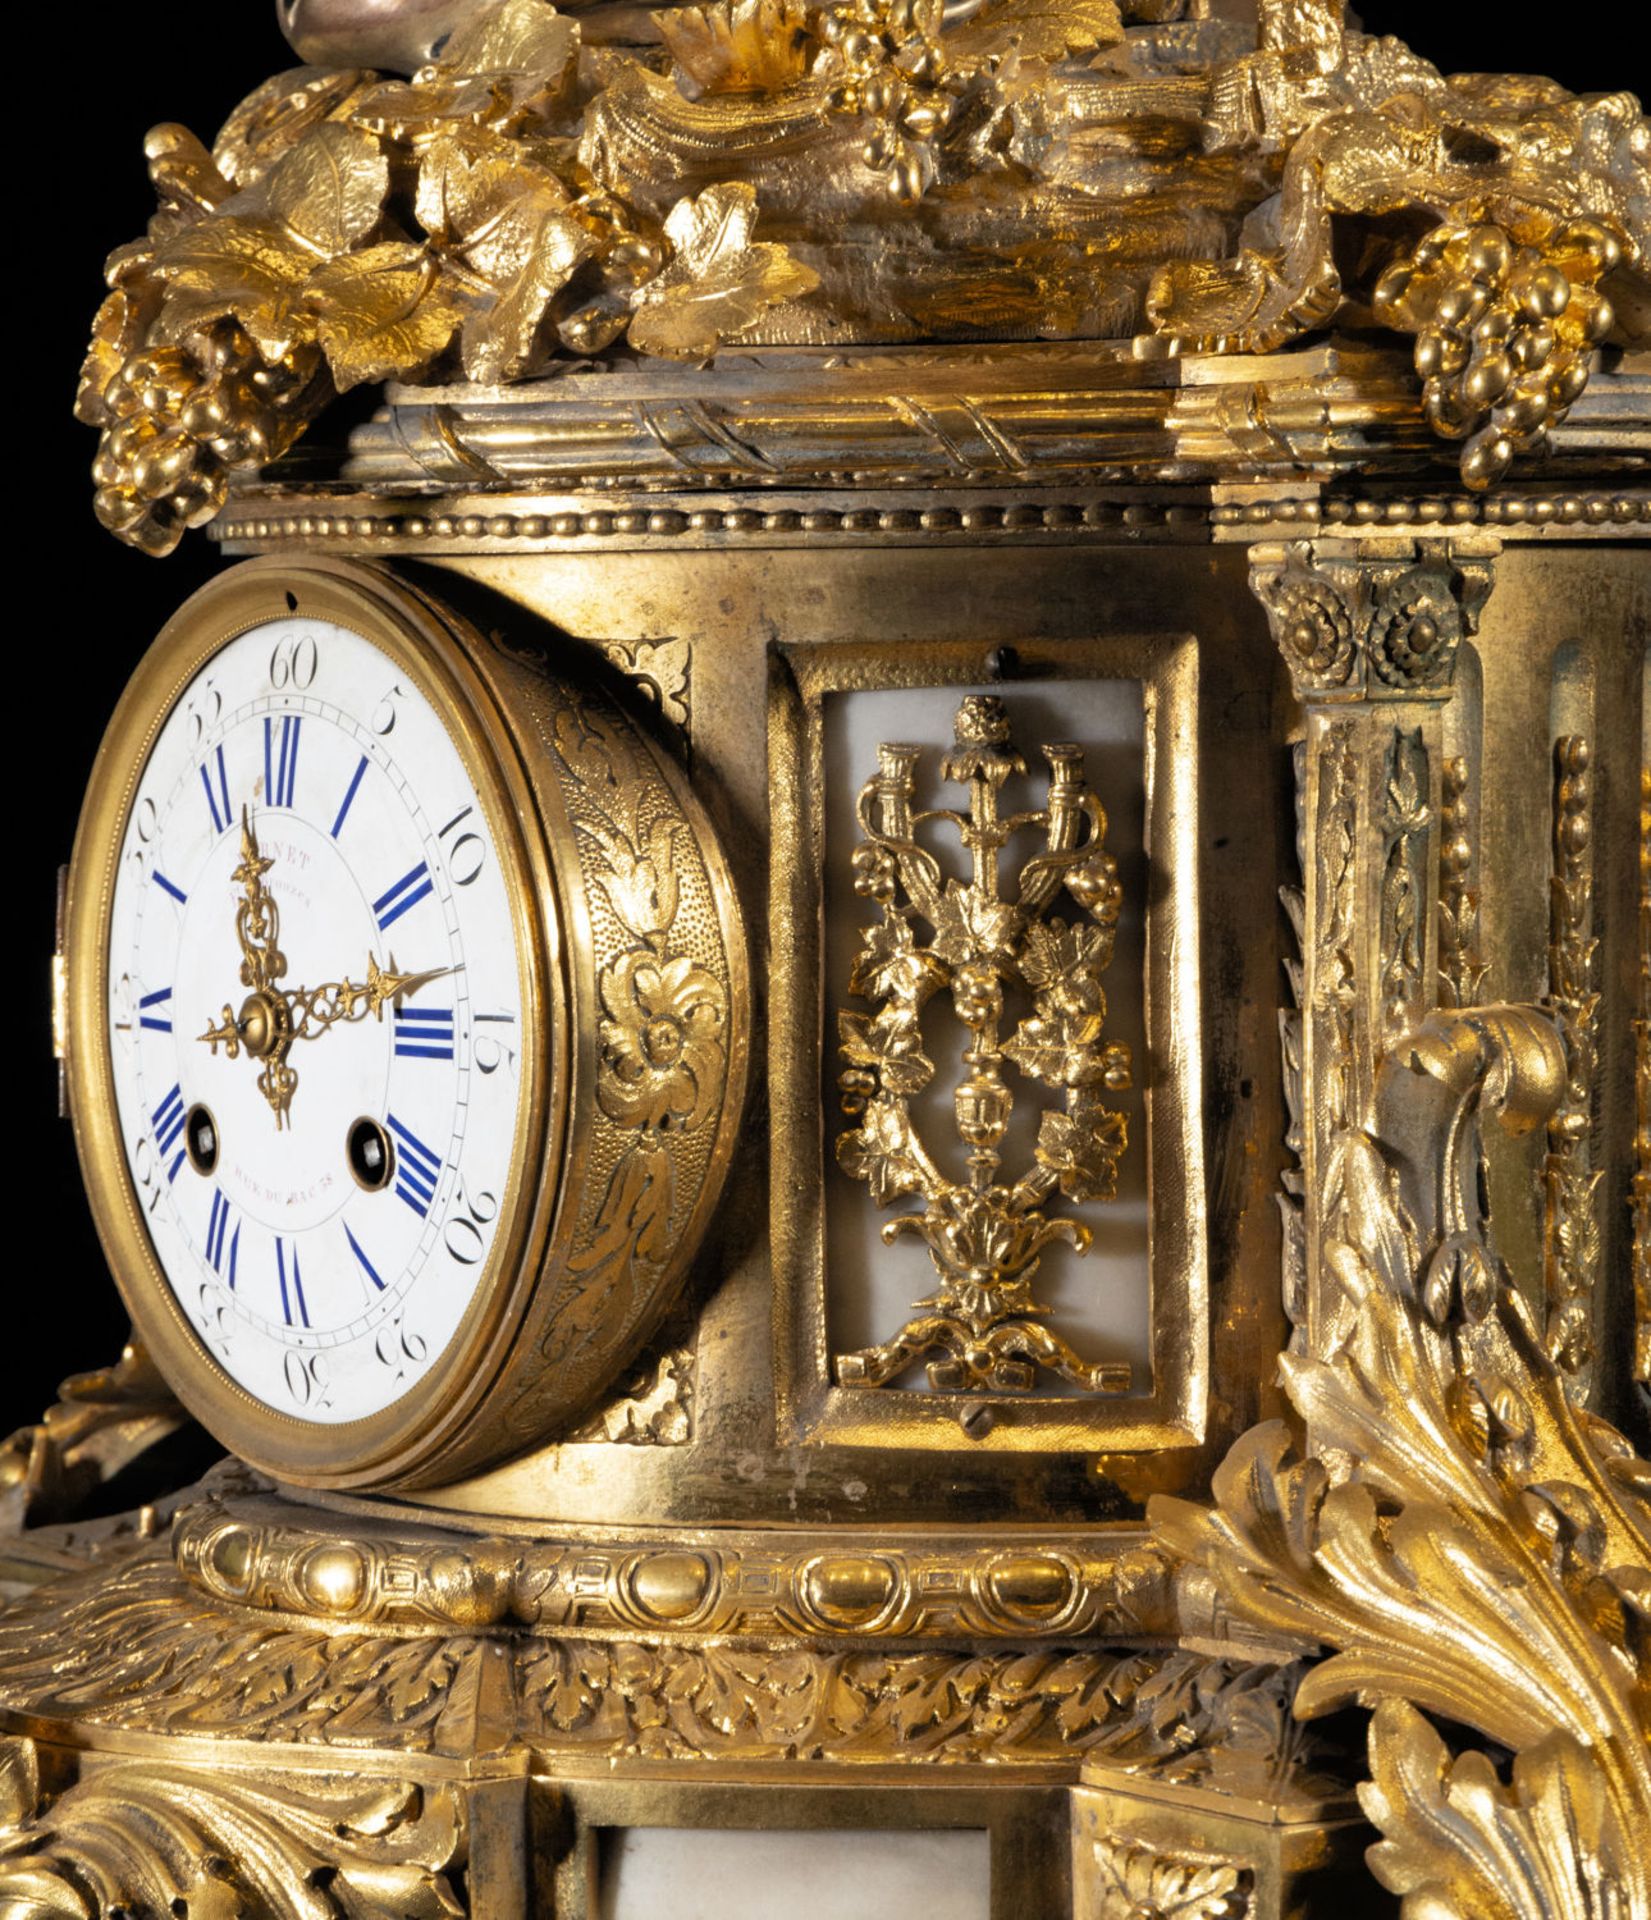 Exquisite Large French Table Clock in Mercury-Gilded Bronze and Alabaster with Bacchus and Goat, Nap - Image 6 of 9